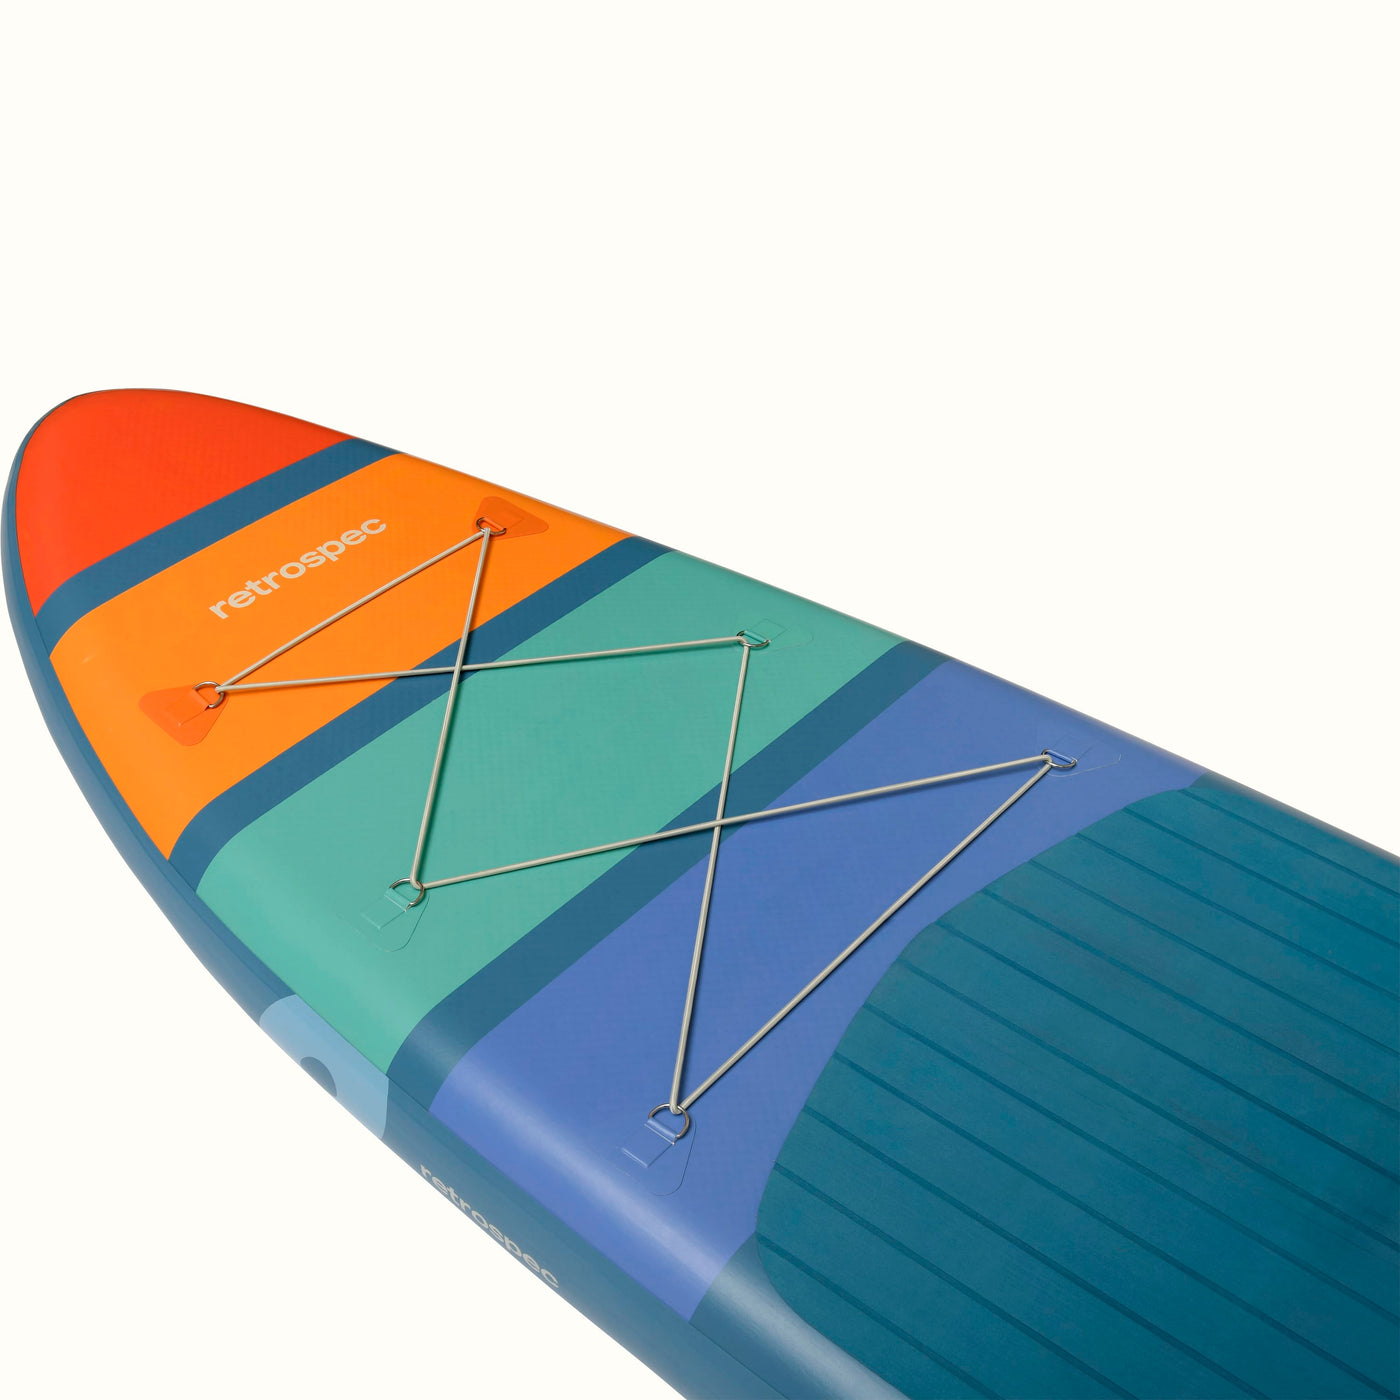 Weekender Inflatable Stand Up Paddle Board 10'6” | Retrospec